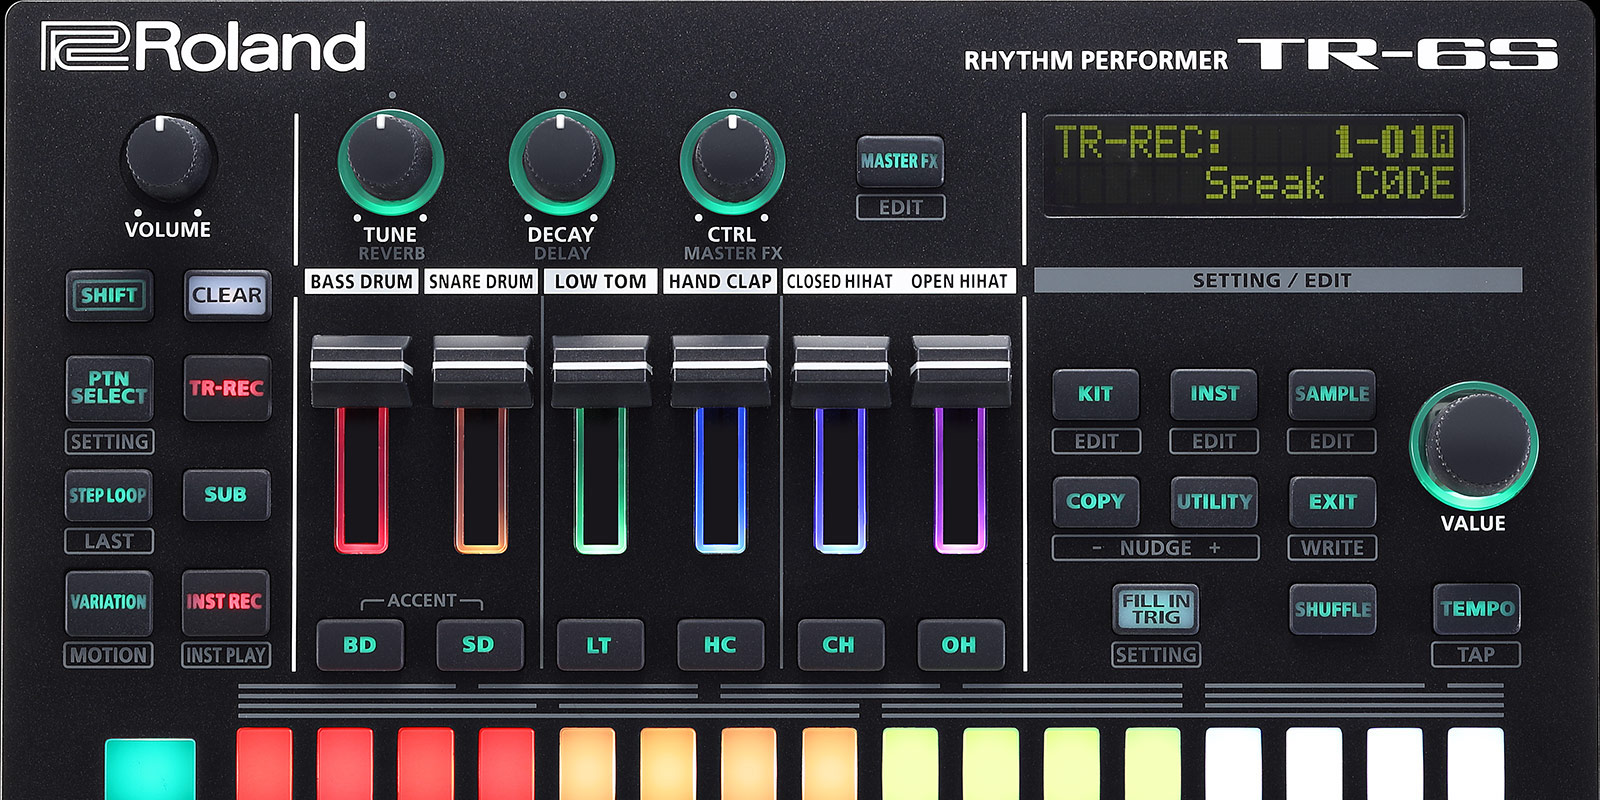 Roland intros new TR-6S drum machine with USB + more - 9to5Toys